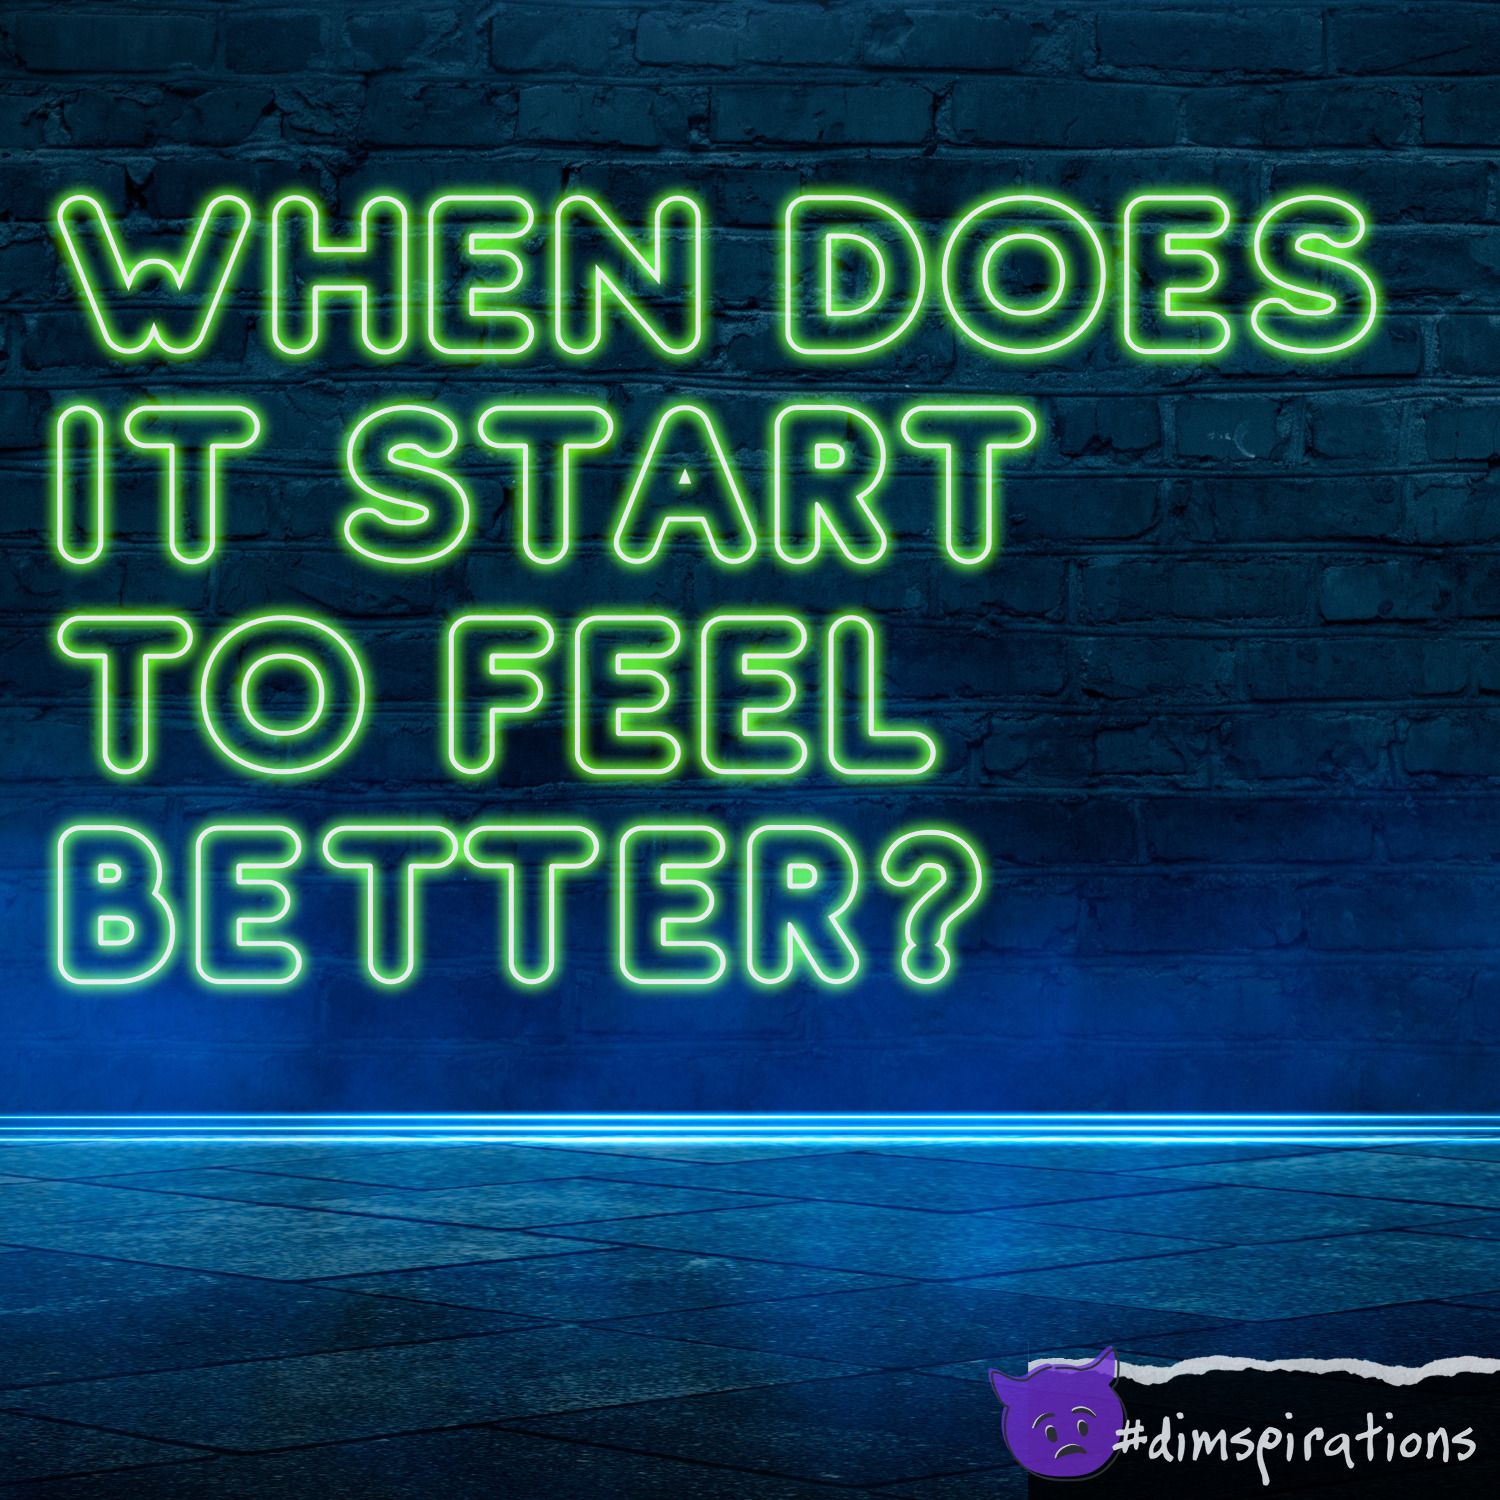 (neon sign) When does it start to feel better?